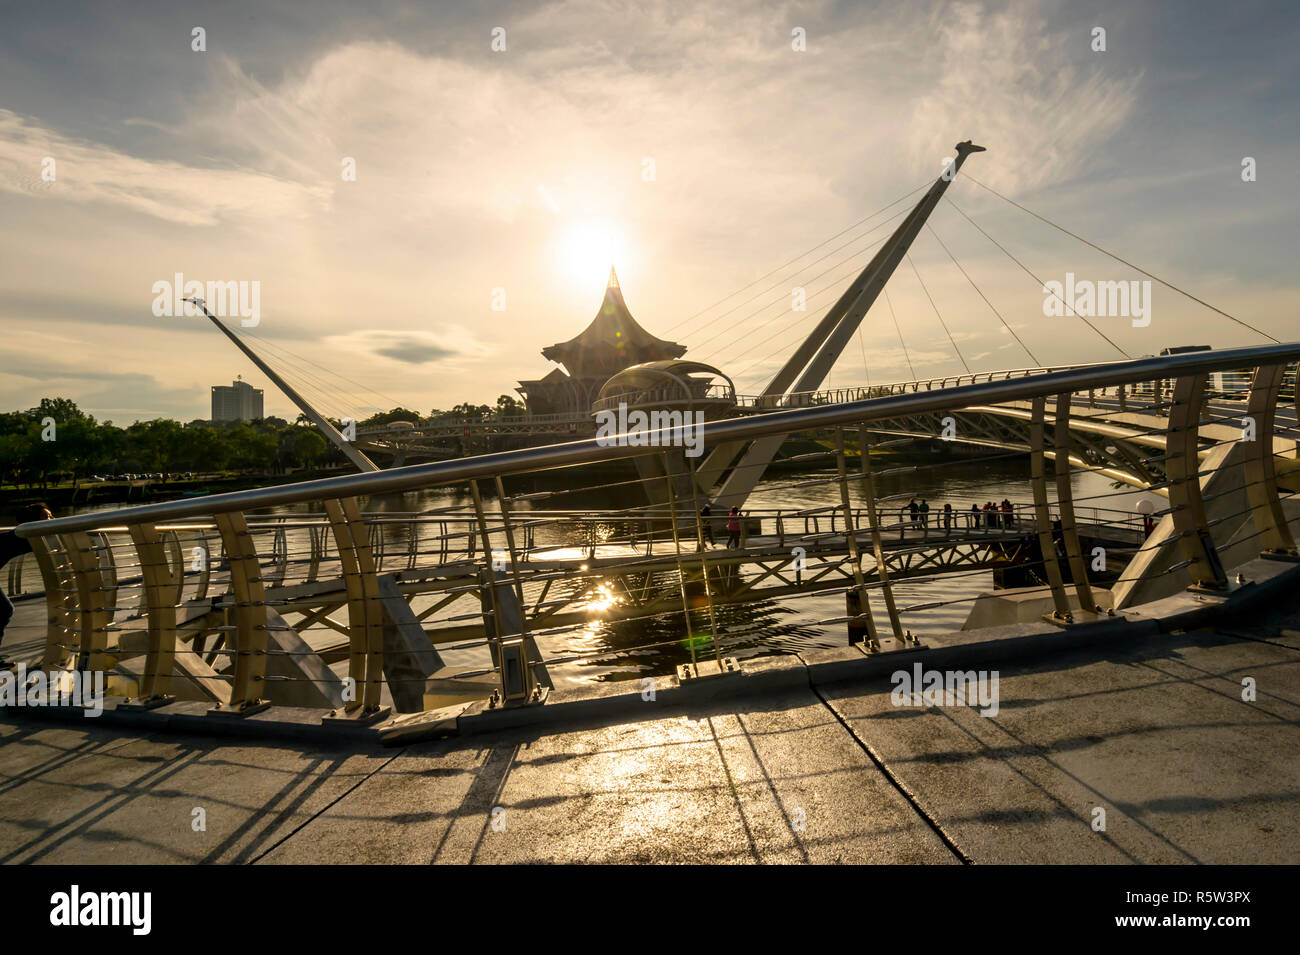 The Darul Hana Bridge in Kuching is the only pedestrian bridge that connects the North and South of Kuching at the moment. Stock Photo